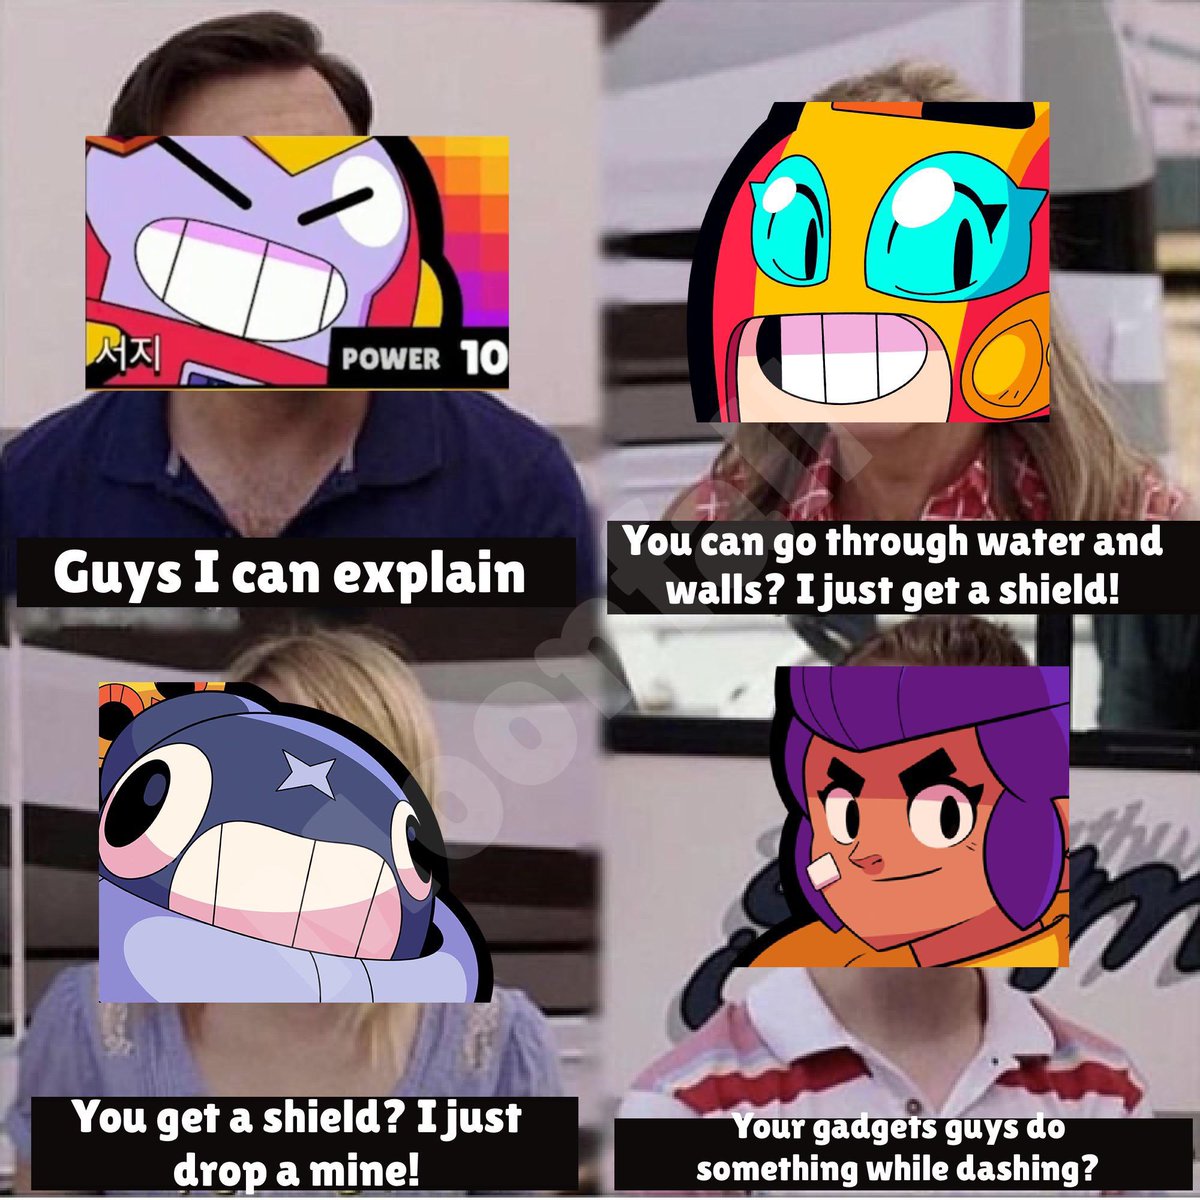 Code Ashbs On Twitter Lol Feel Bad For Shelly Man I Hate Every Time I Accidentally Dash Into A Wall With Shelly Meme Source Https T Co Xlvjaailmj Brawlstars Https T Co 6ezbgja5ze - memes brawl stars shelly